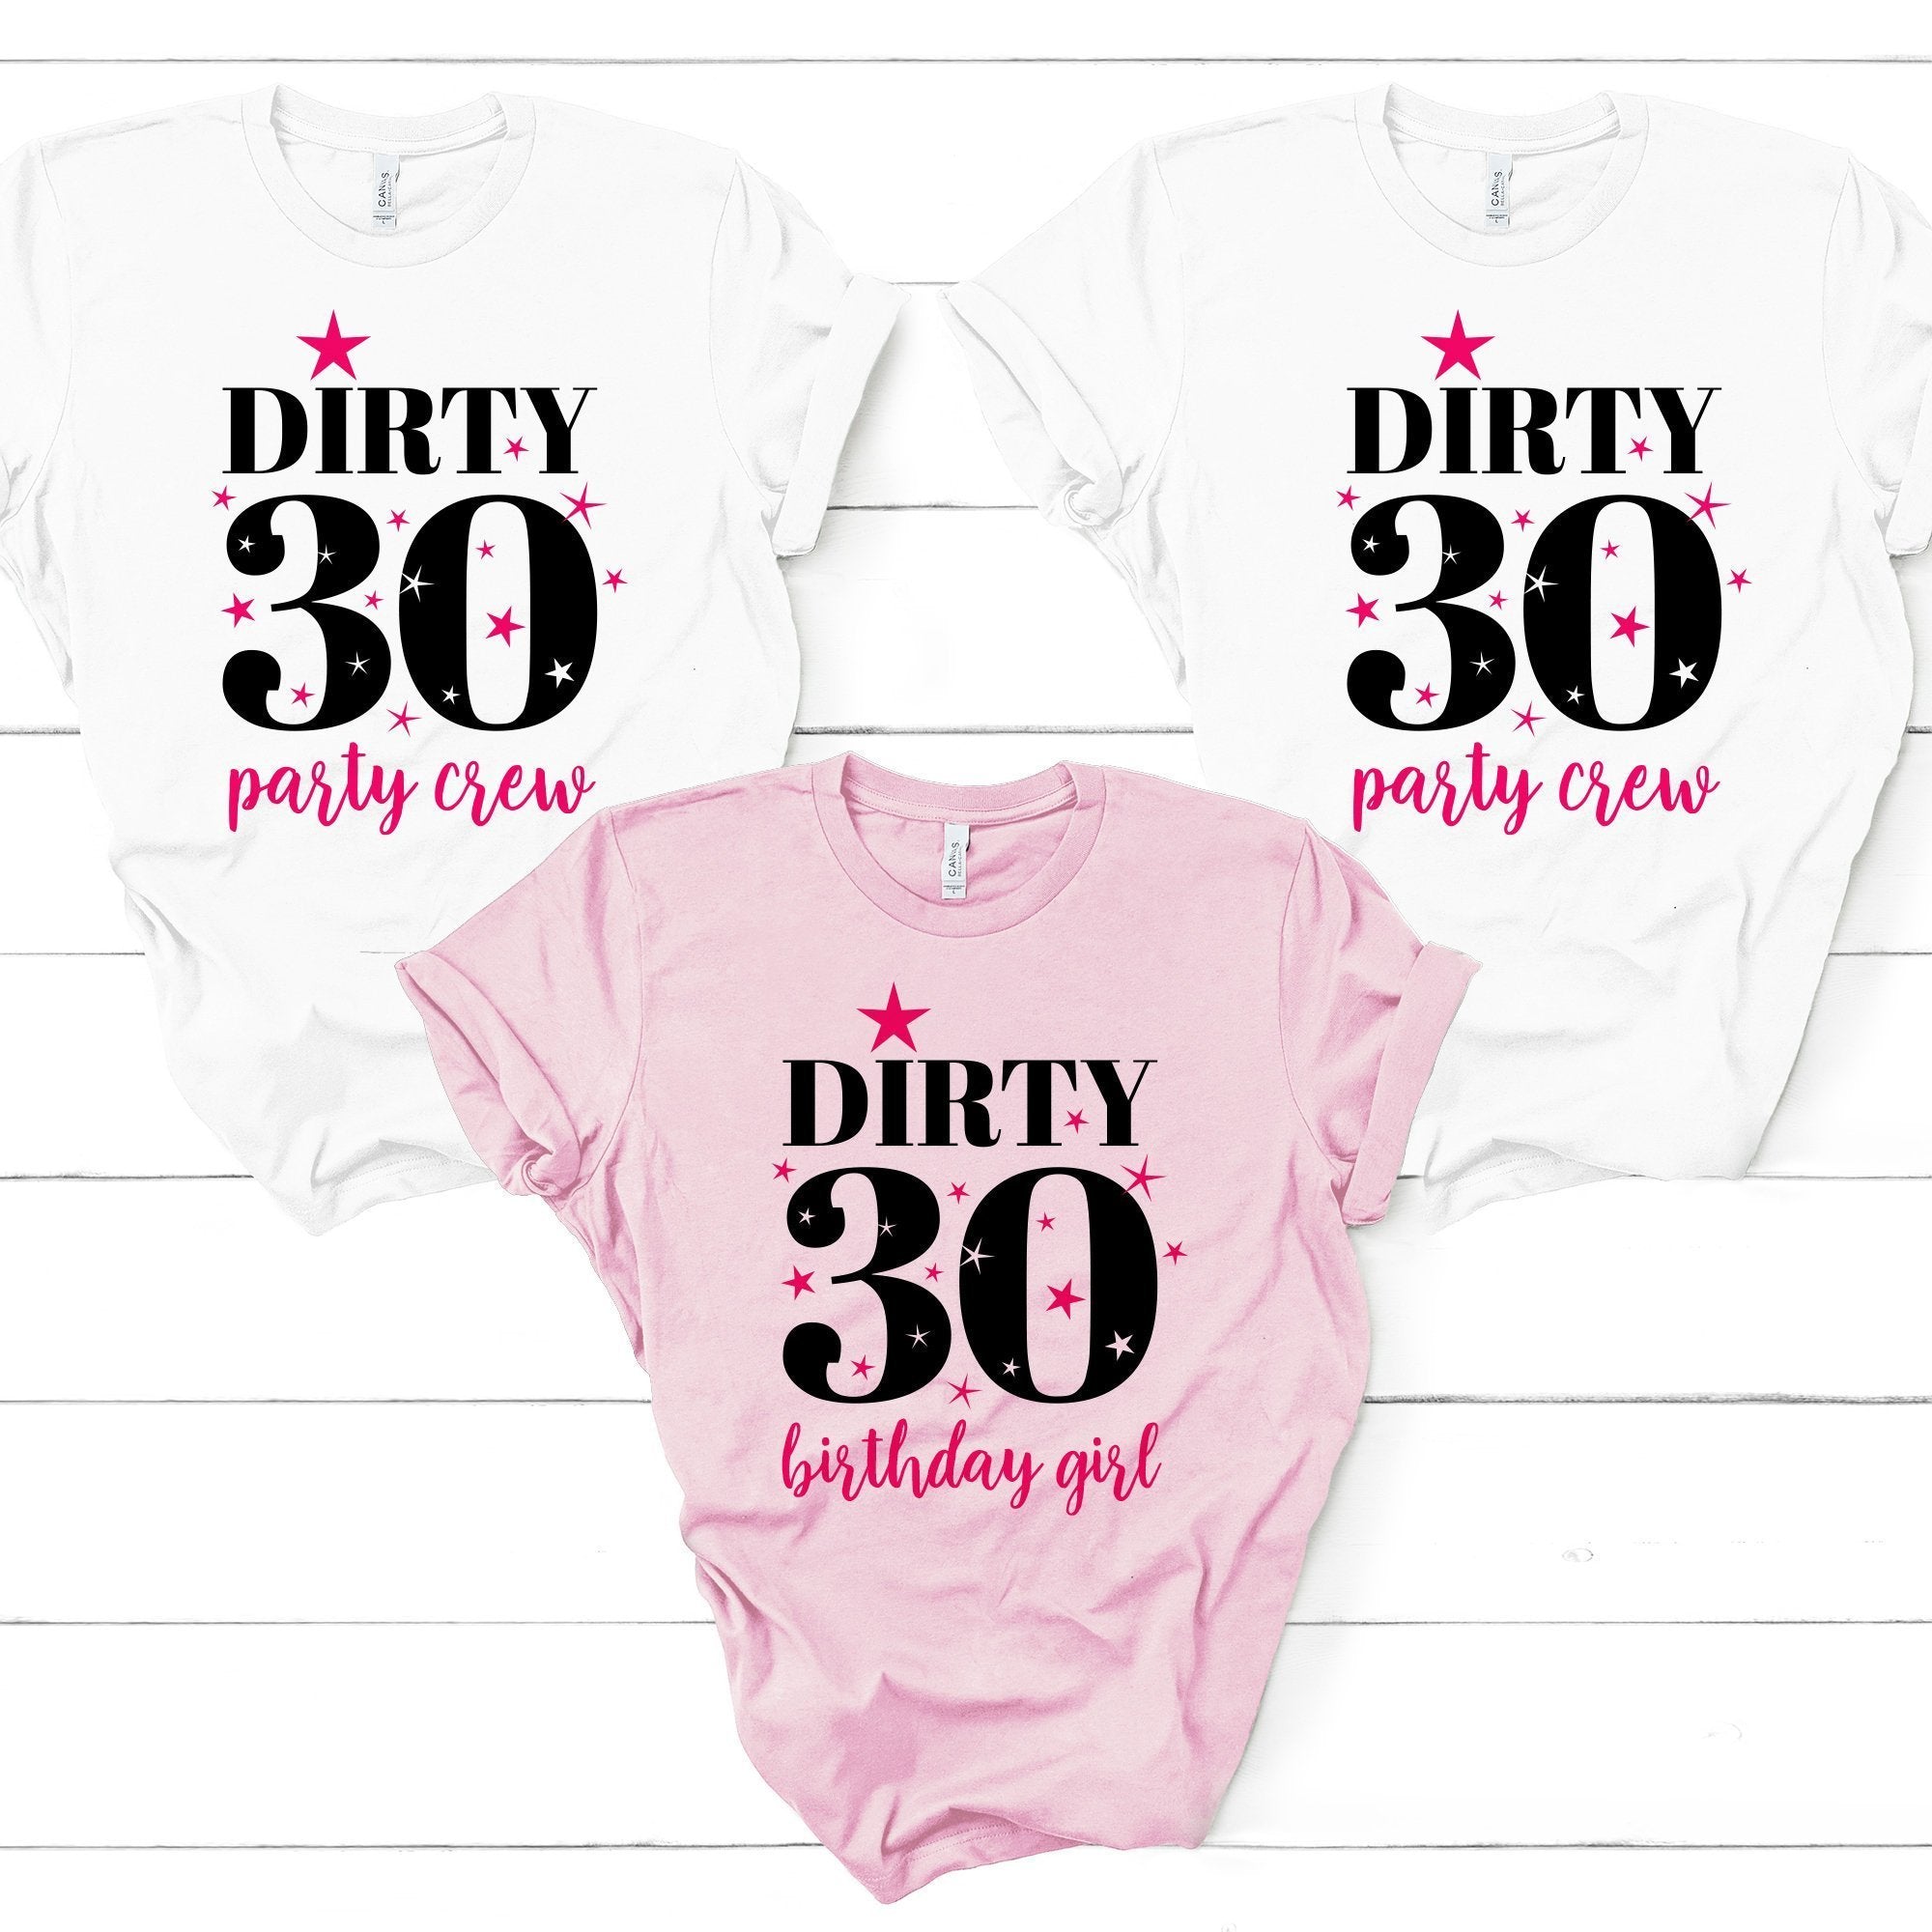 Dirty 30 Birthday Girl And Party Crew T-Shirt Unisex Sizes 30Th Birthday T Shirt